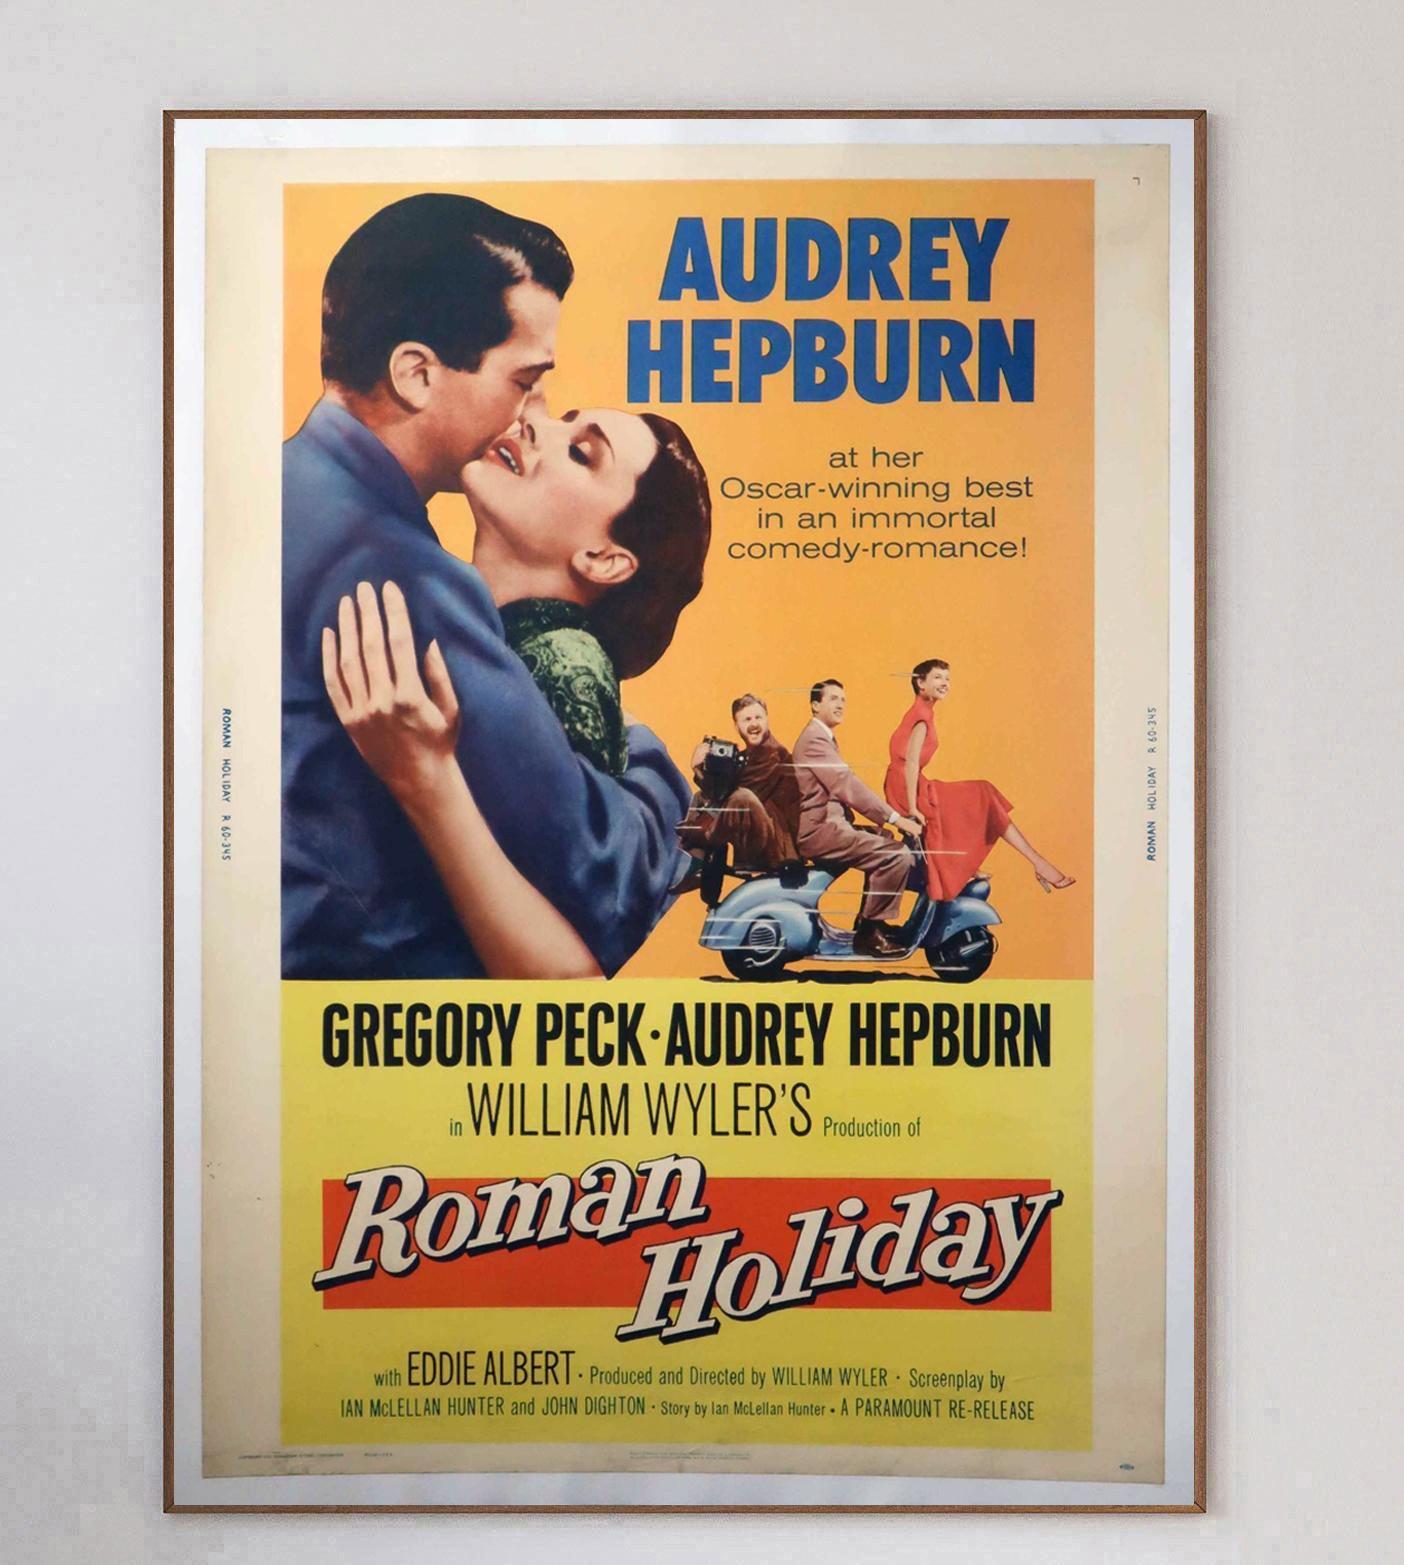 Starring the iconic pairing of Audrey Hepburn and Gregory Peck, 